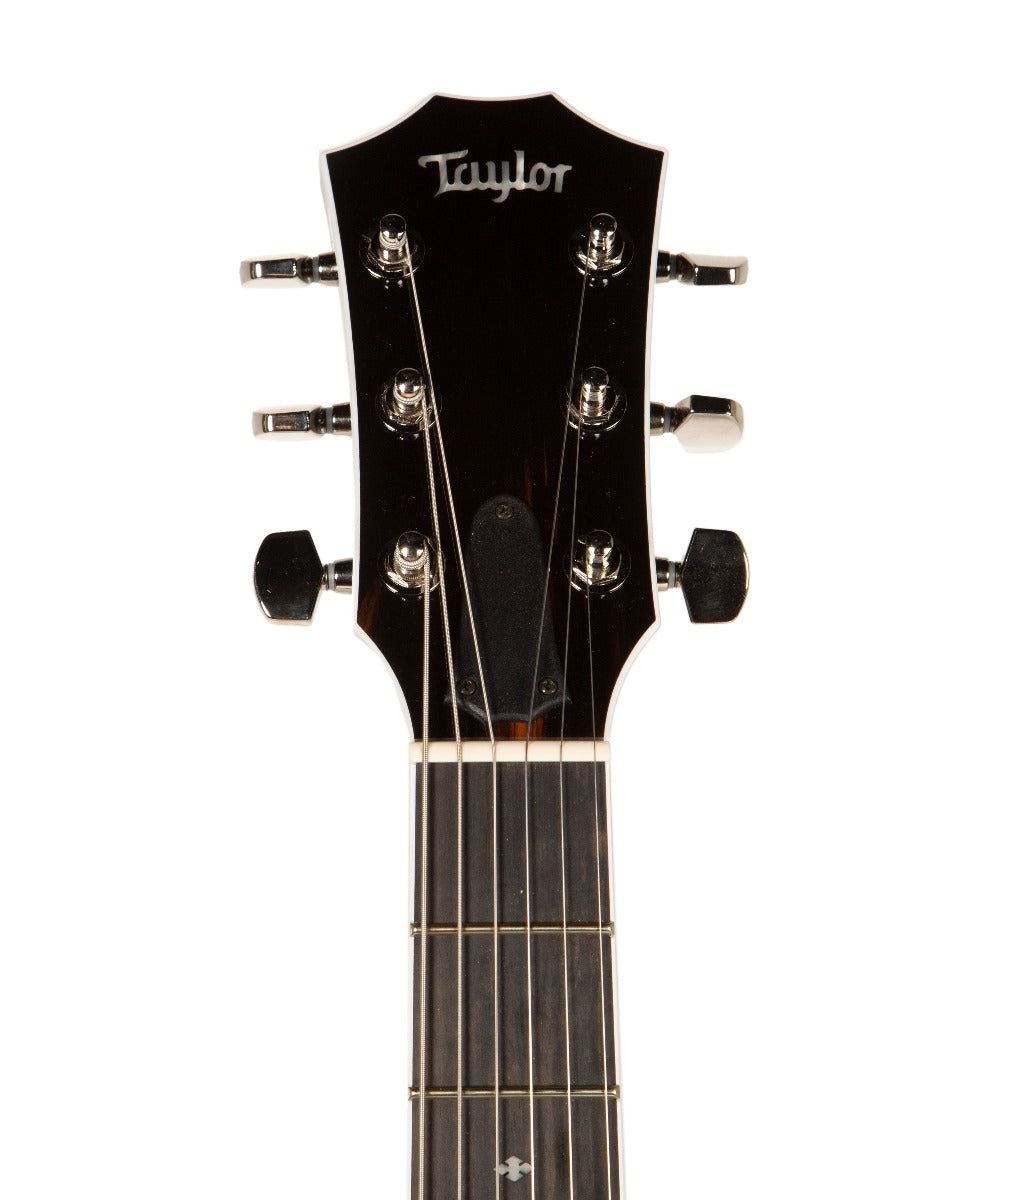 Taylor T5z Standard Spruce Top Thinline Acoustic Electric Guitar in Black